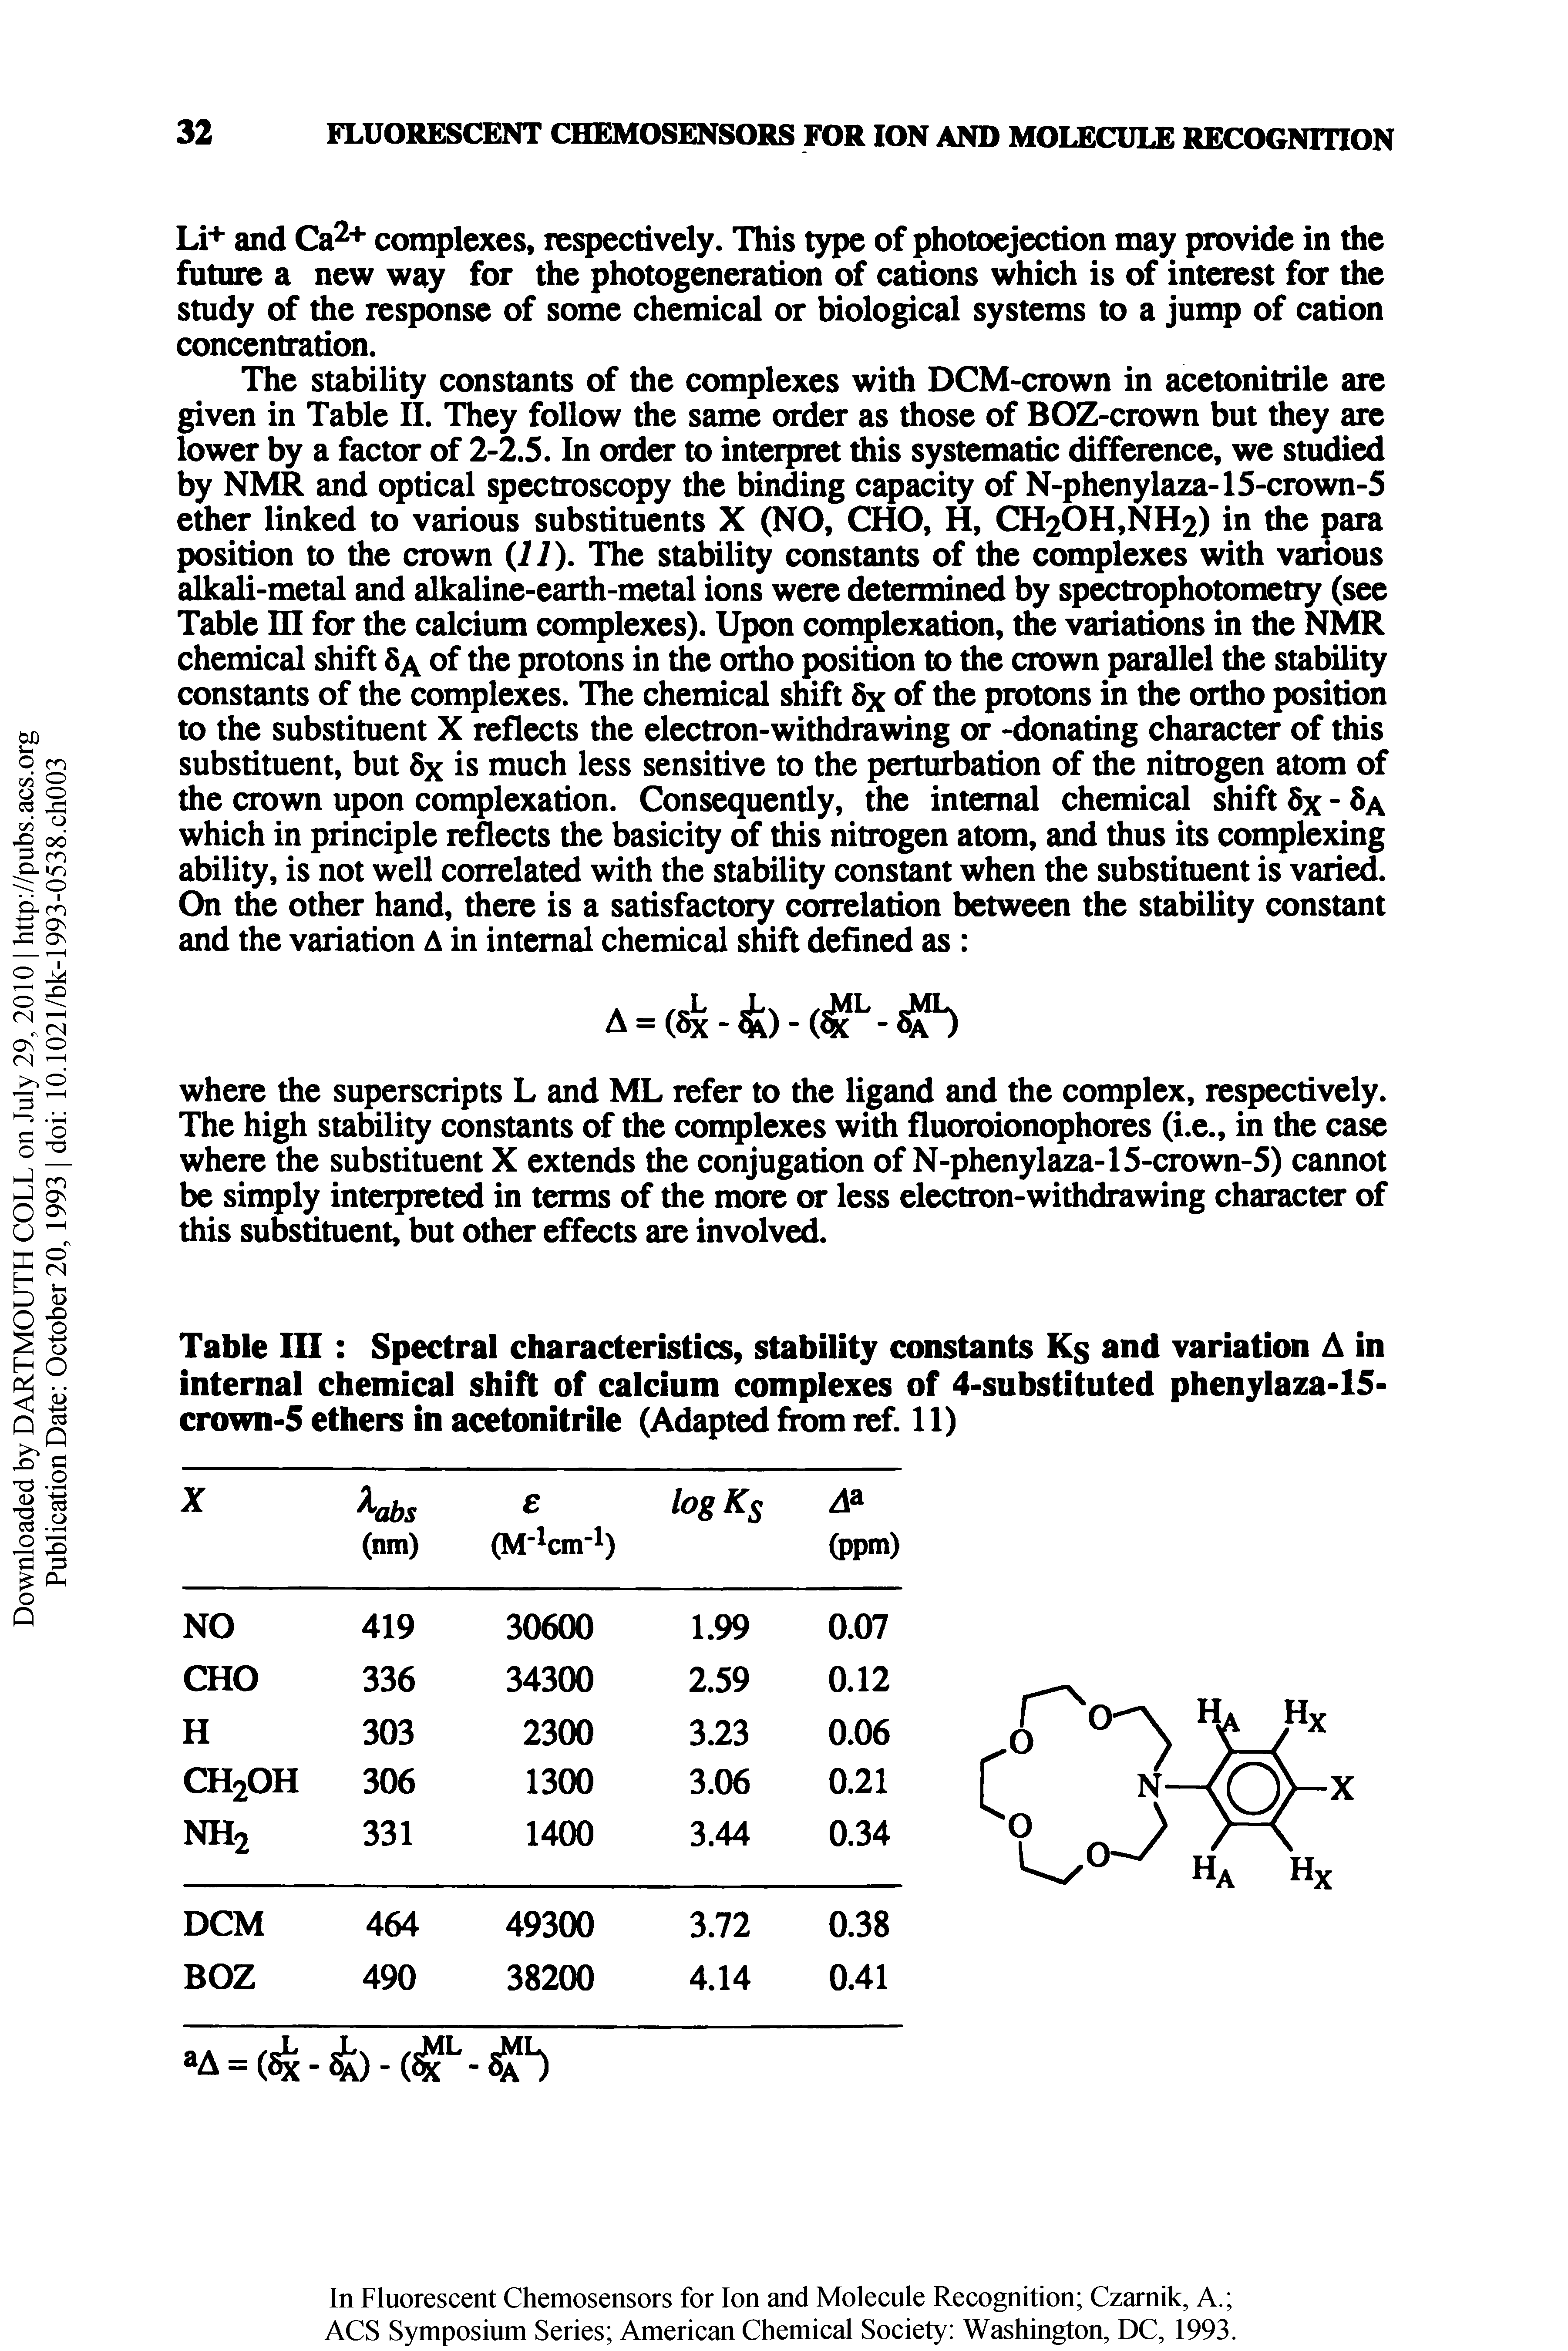 Table III Spectral characteristics, stability constants Kg and variation A in internal chemical shift of calcium complexes of 4-substituted phenylaza-15-crown-5 ethers in acetonitrile (Adapted from ref. 11)...